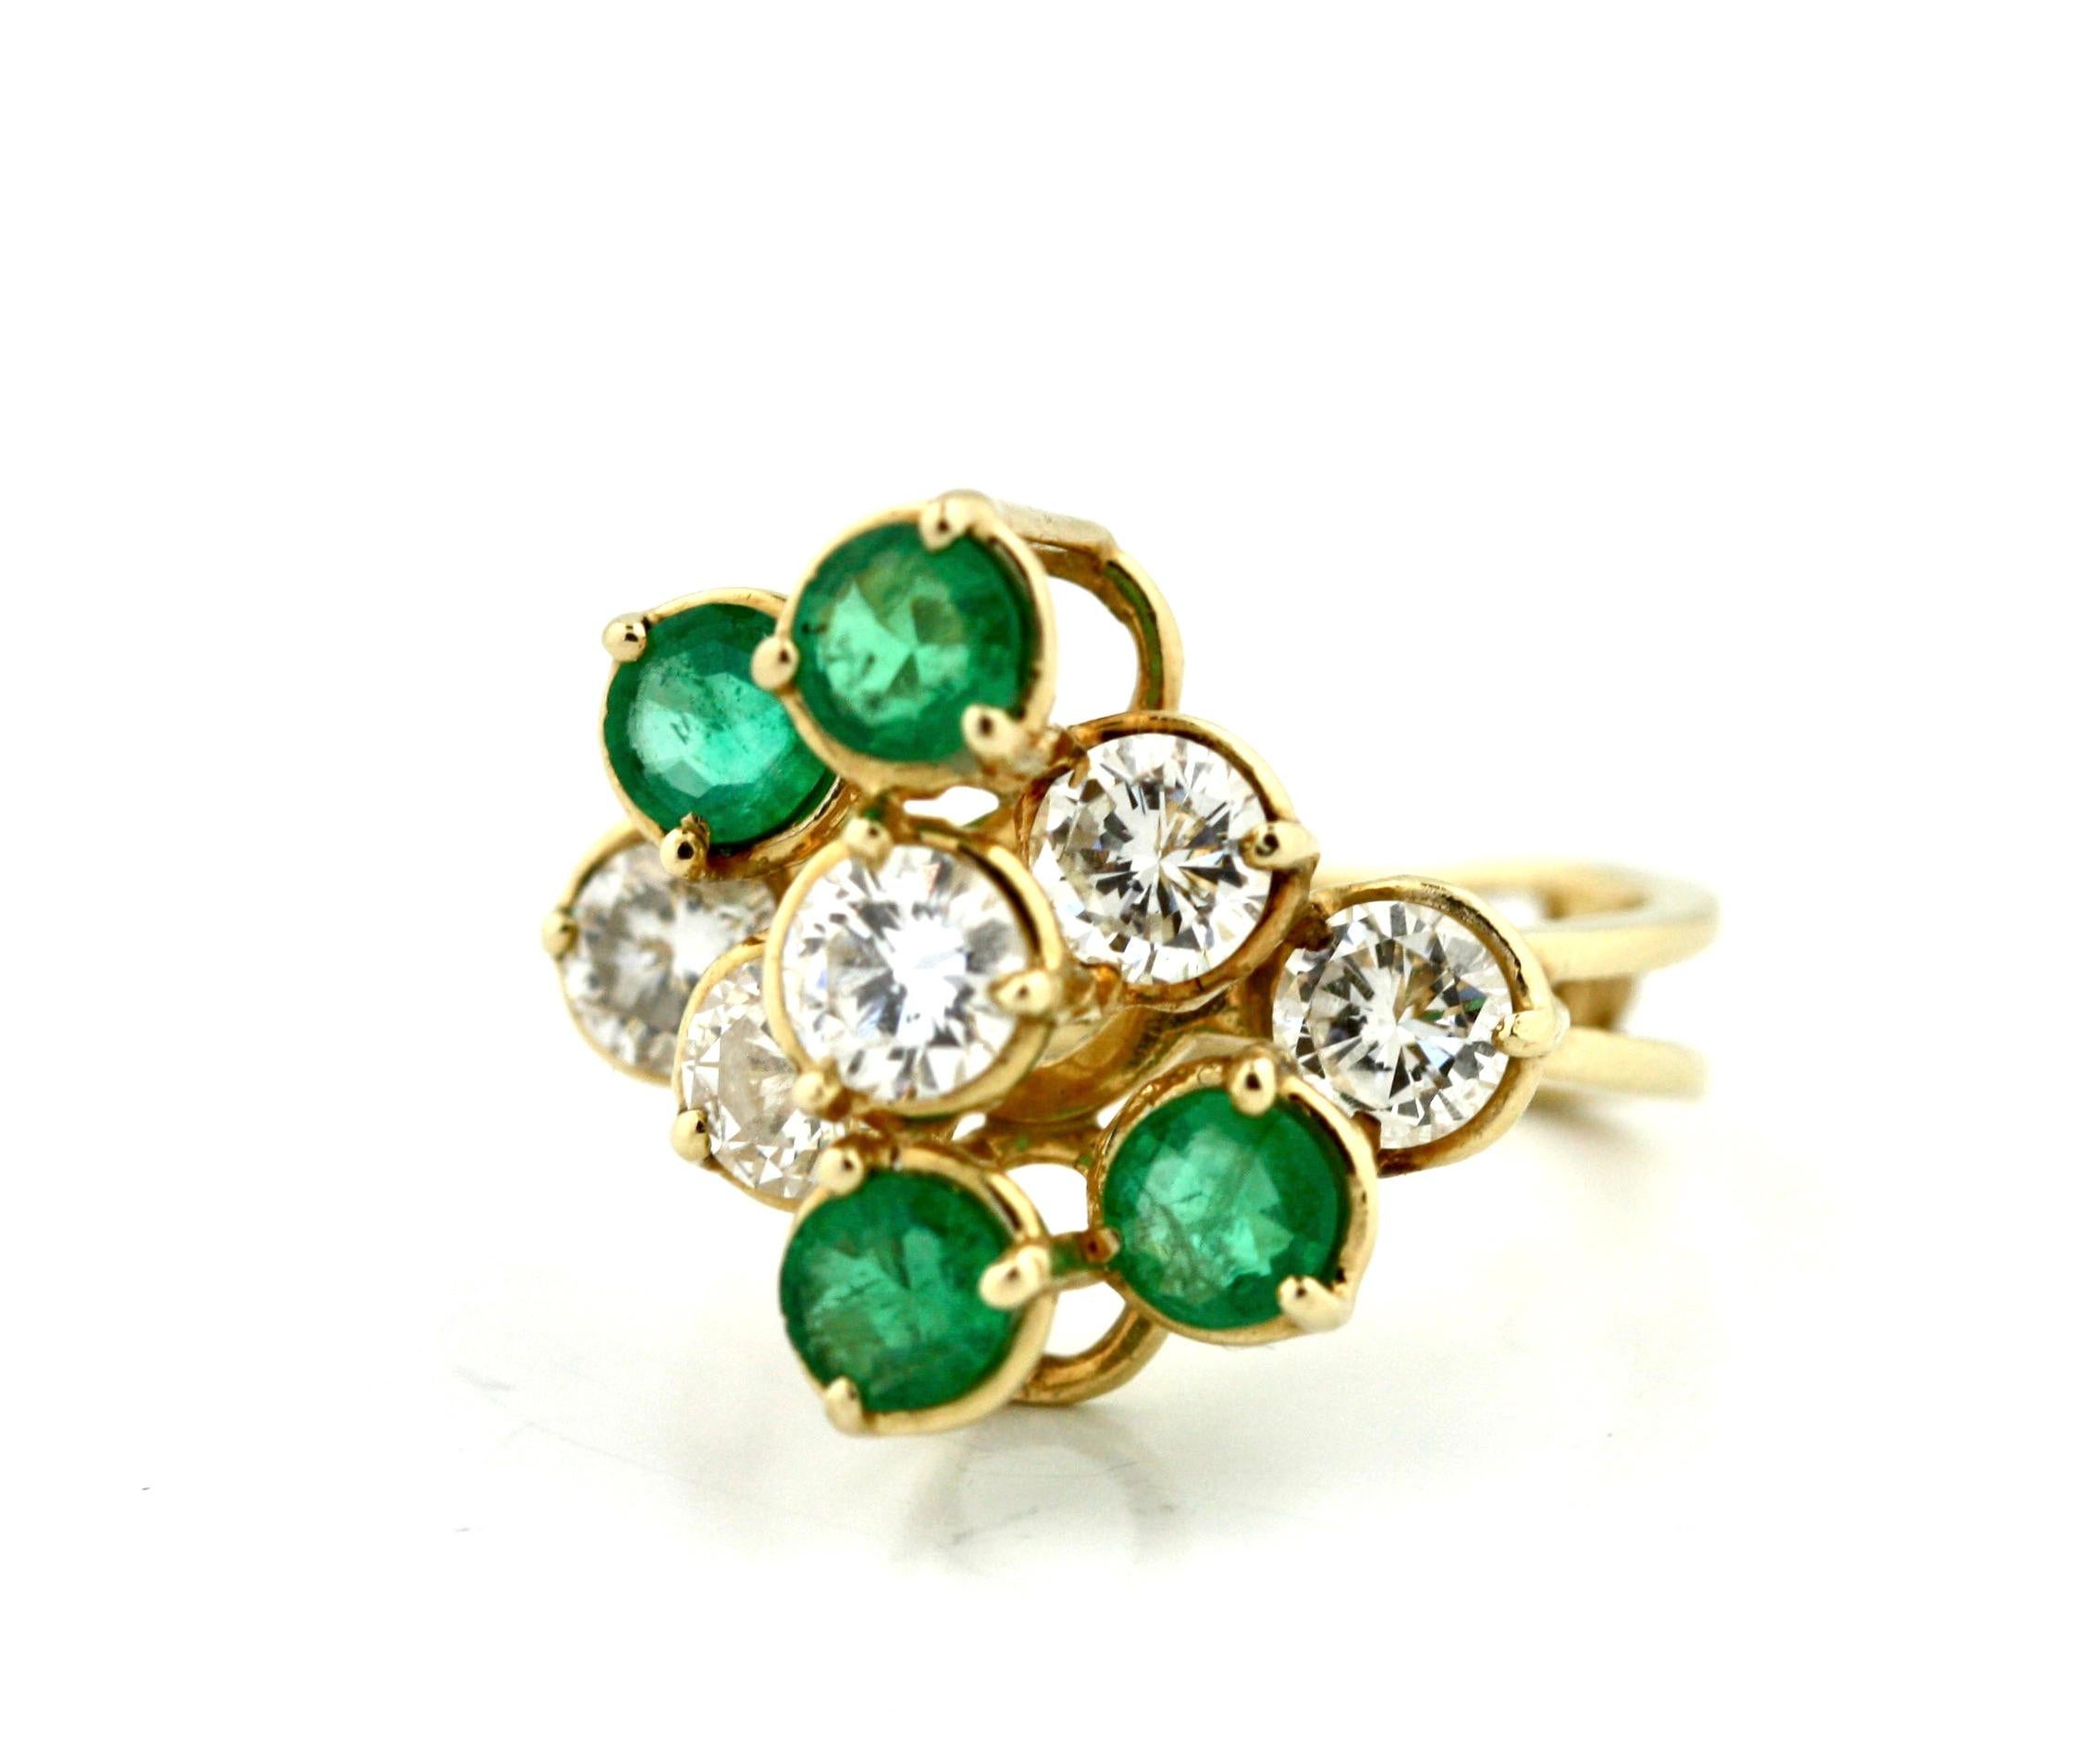 
EMERALD AND DIAMOND RING
5 Diamonds weighing approx. 2.00 carats, 4 round faceted emeralds weighing approx. 1.36 carats, mounted in 14kt yellow gold, size 5 1/2